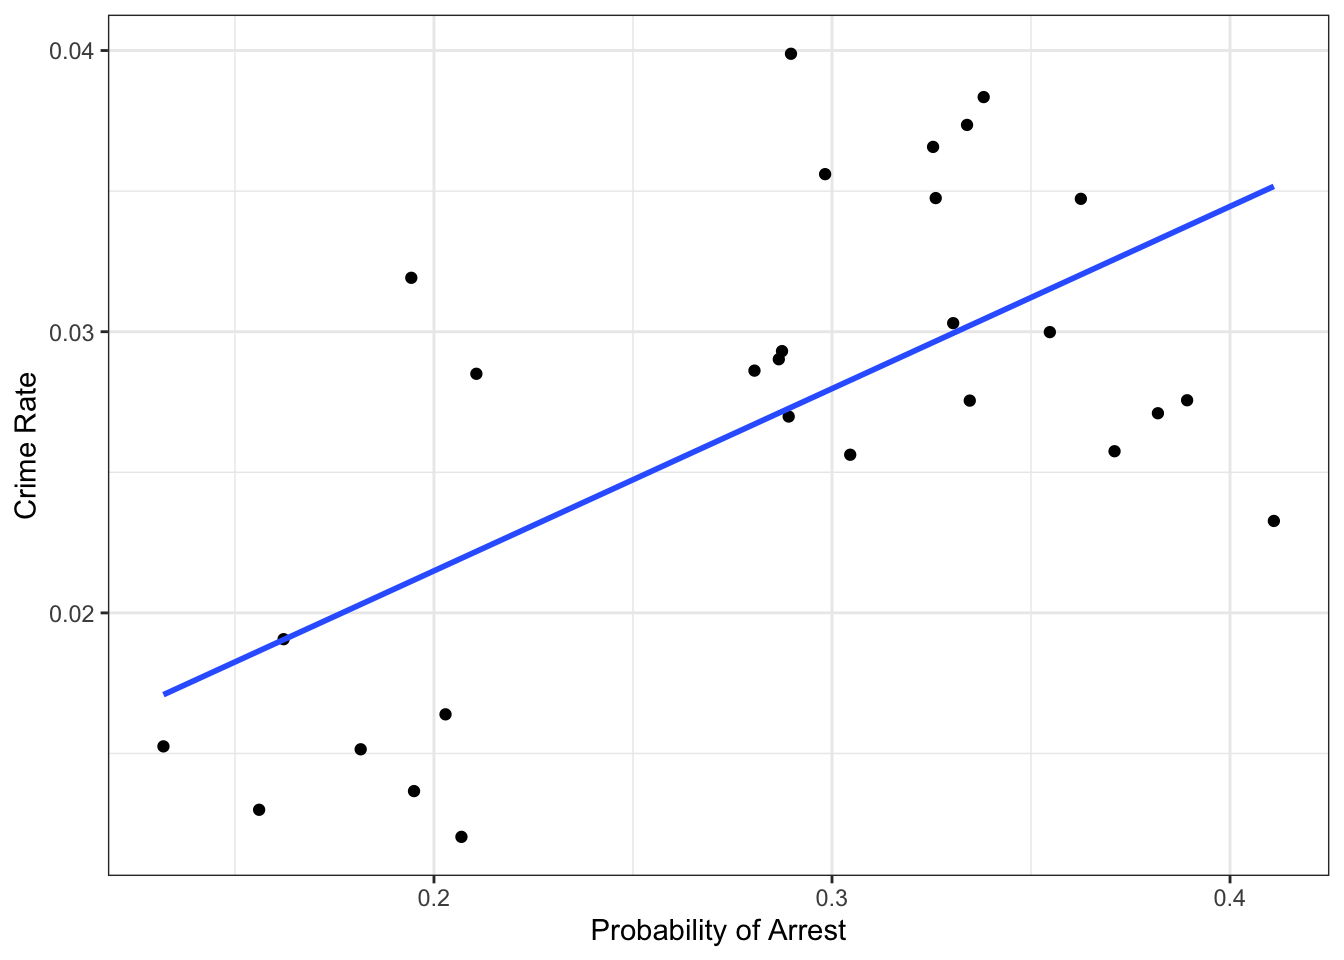 Probability of arrest vs Crime rates in the cross section